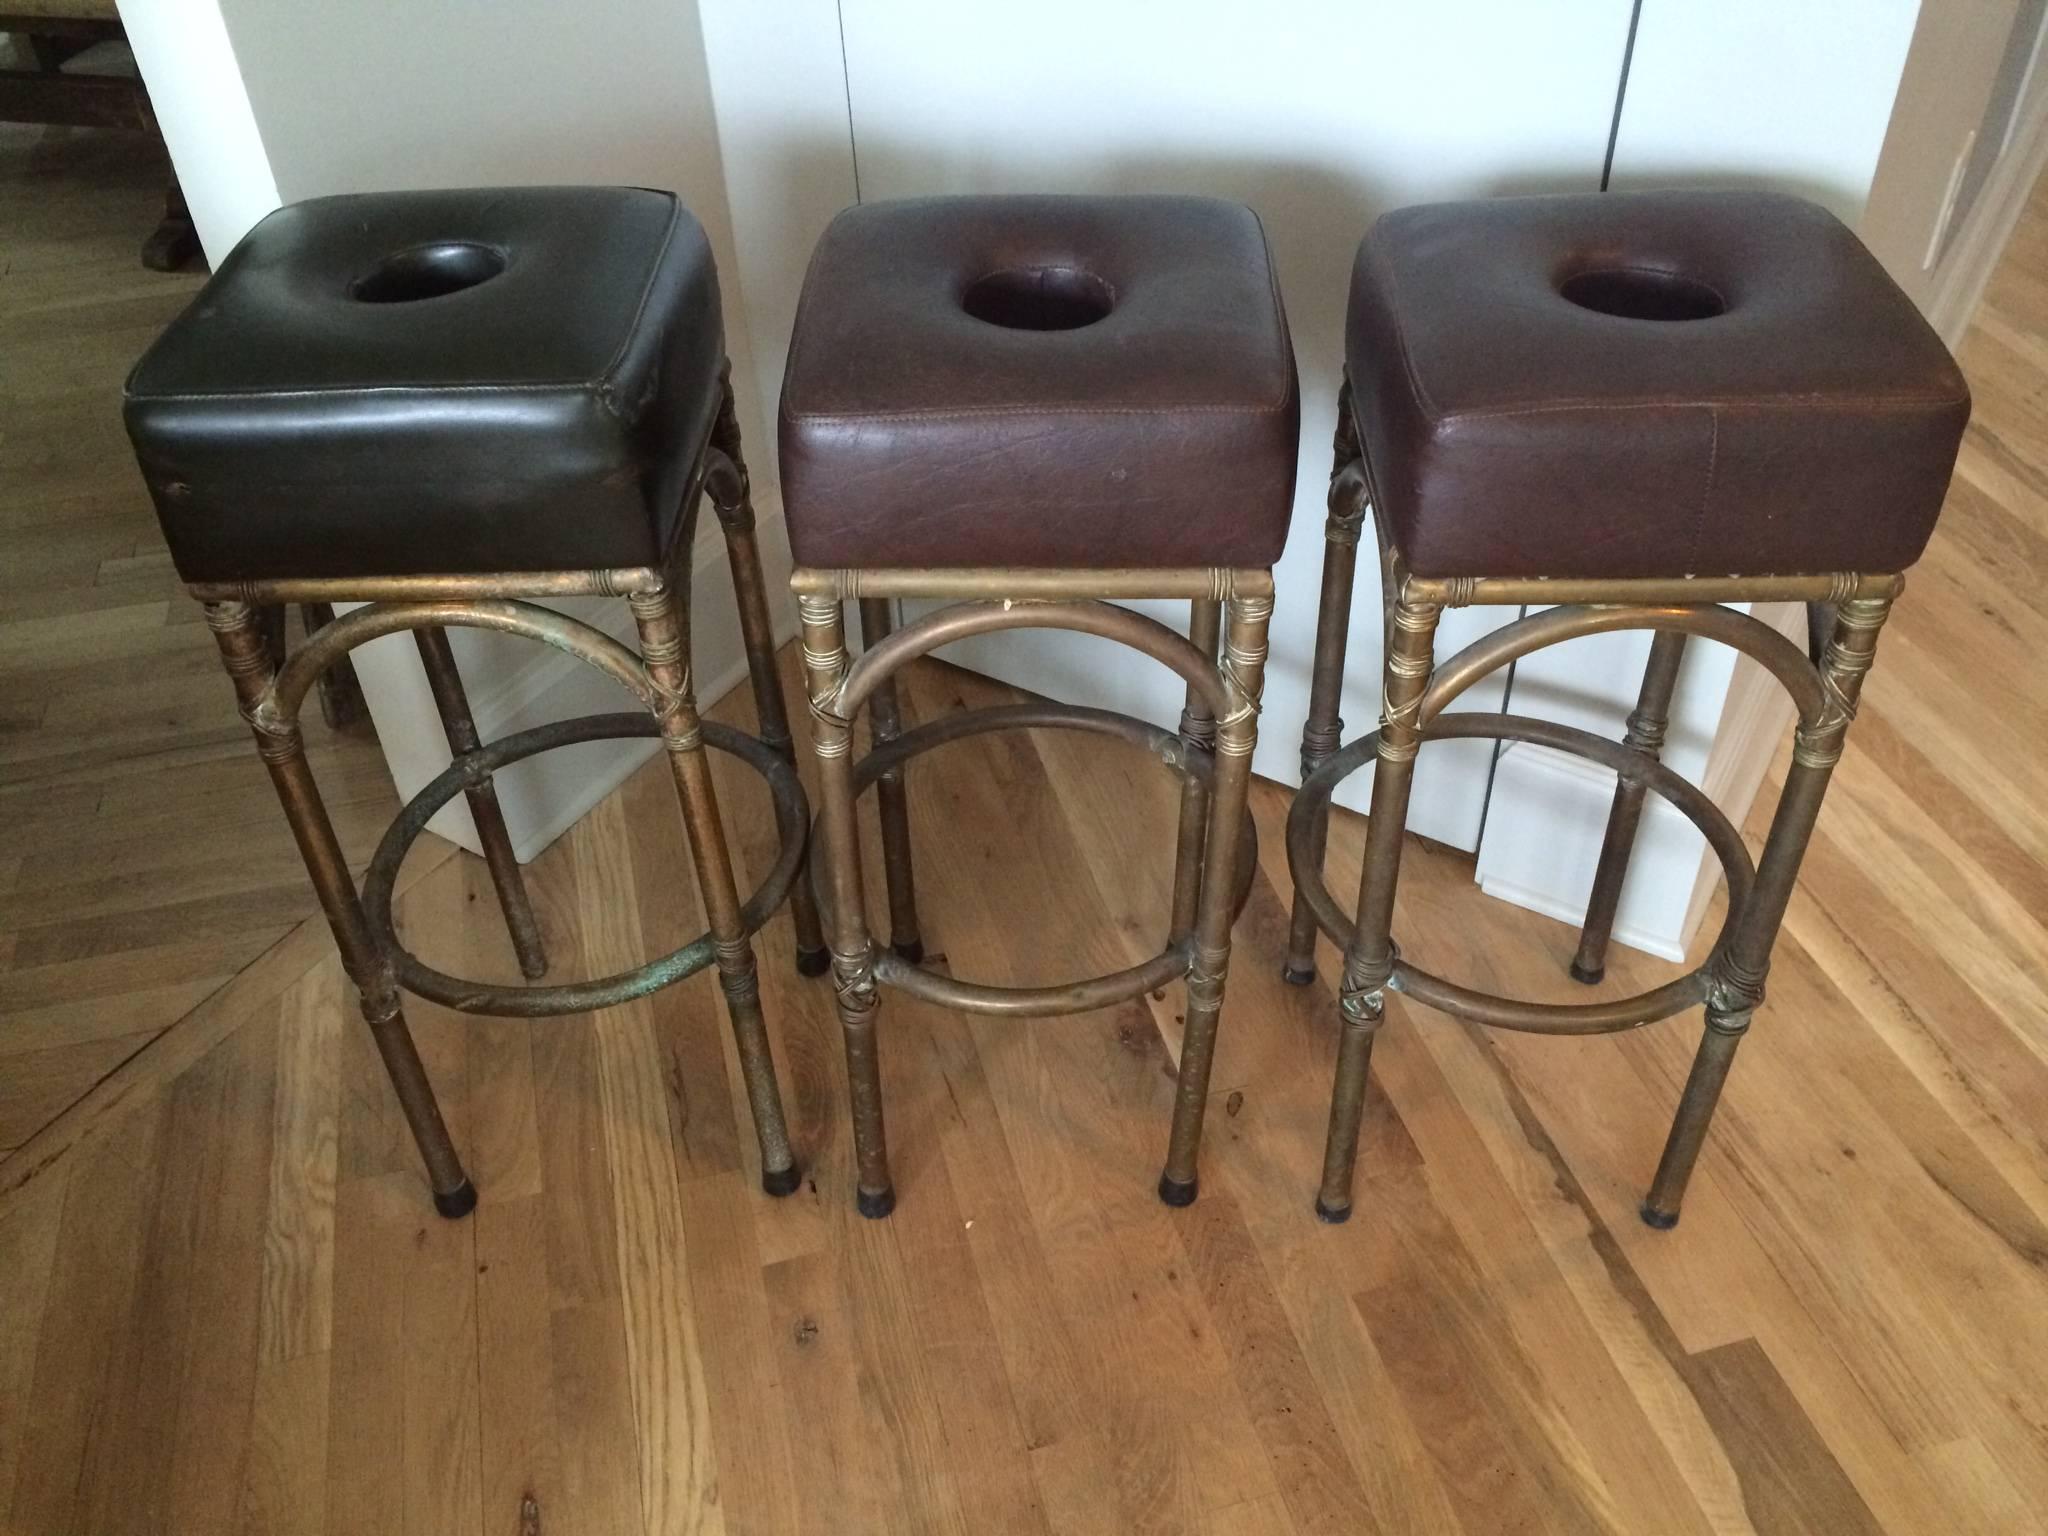 Set of three English leather and brass bar stools from an English pub. Original and quite heavy the cut-out was to reach your hand through and more easily carry the stool. Two are burgundy and one is more green.